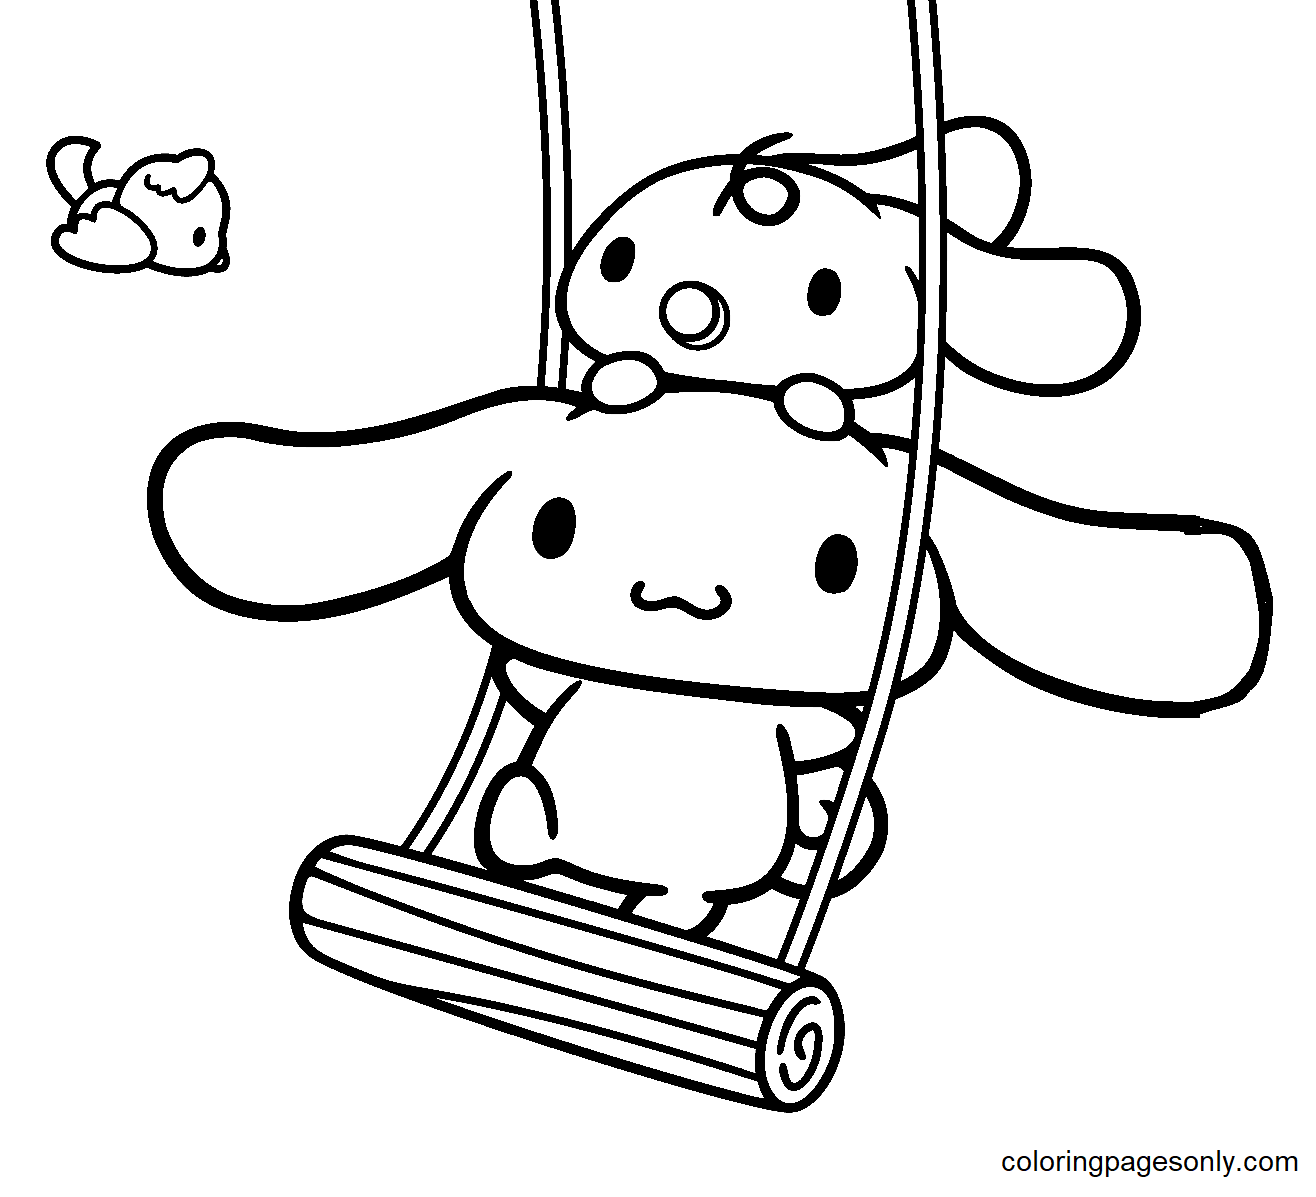 Cinnamoroll Coloring Pages Coloring Pages For Kids And Adults